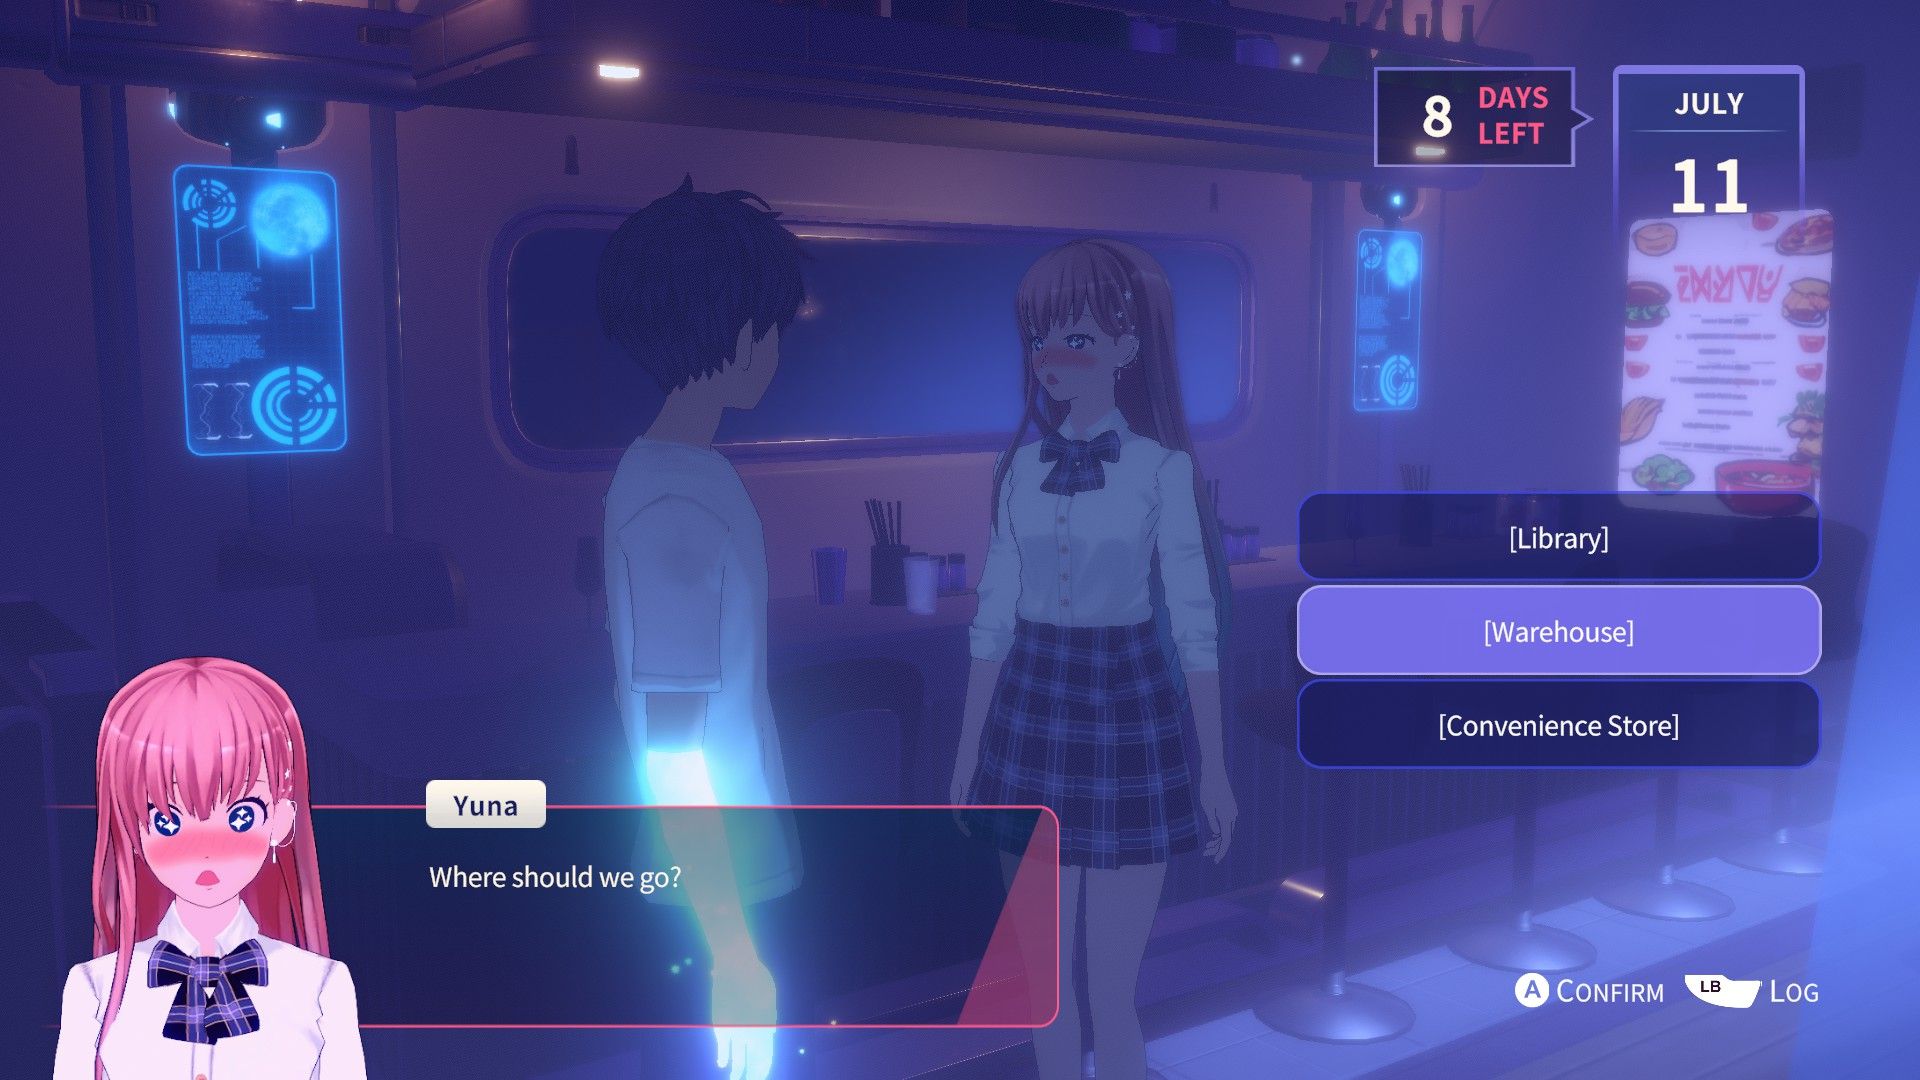 “A Fine First Date, But Might Not Be Marriage Material”: Eternights Review